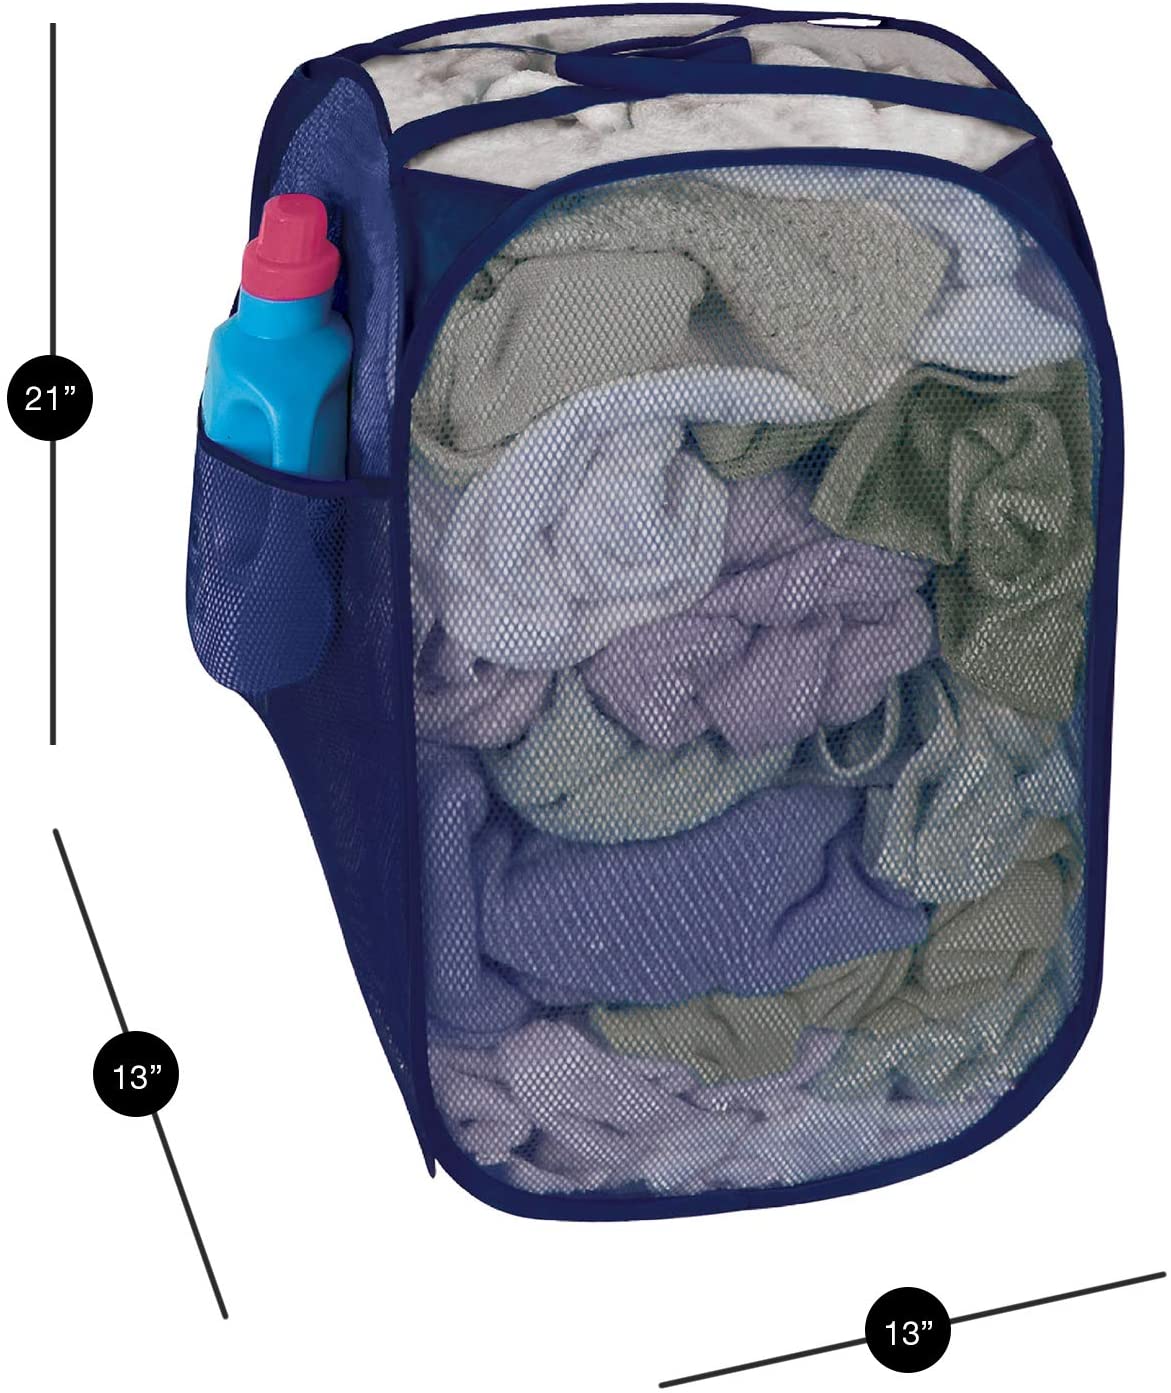 Pop-Up Laundry Hamper with Easy Carry Handles and Side Pocket - Smart Design® 17